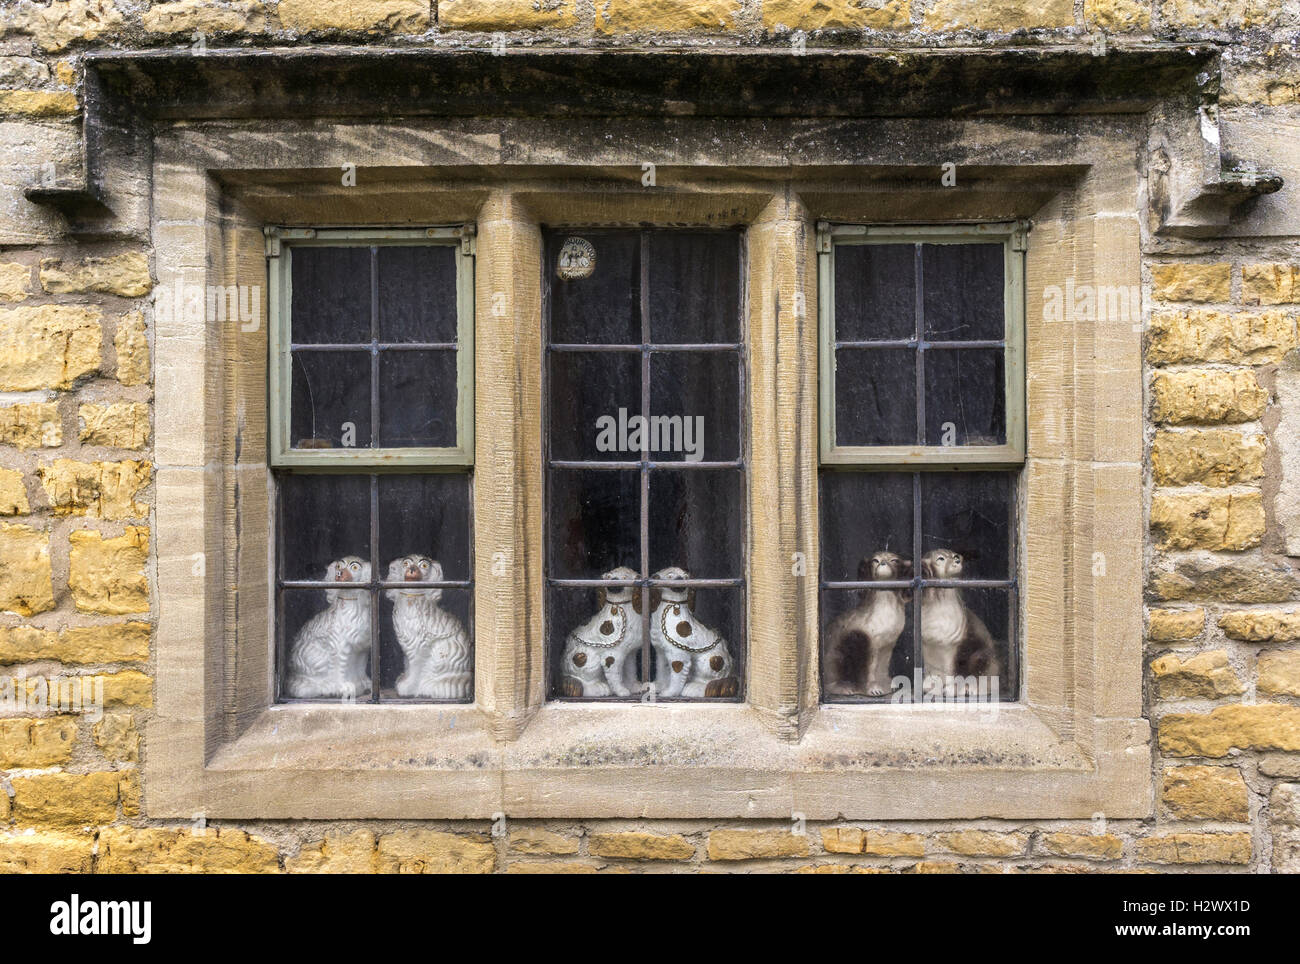 Stafforshire pottery dogs in a 17th cen. window, Bourton on the water, Cotswolds, Glousteshire, England. Stock Photo